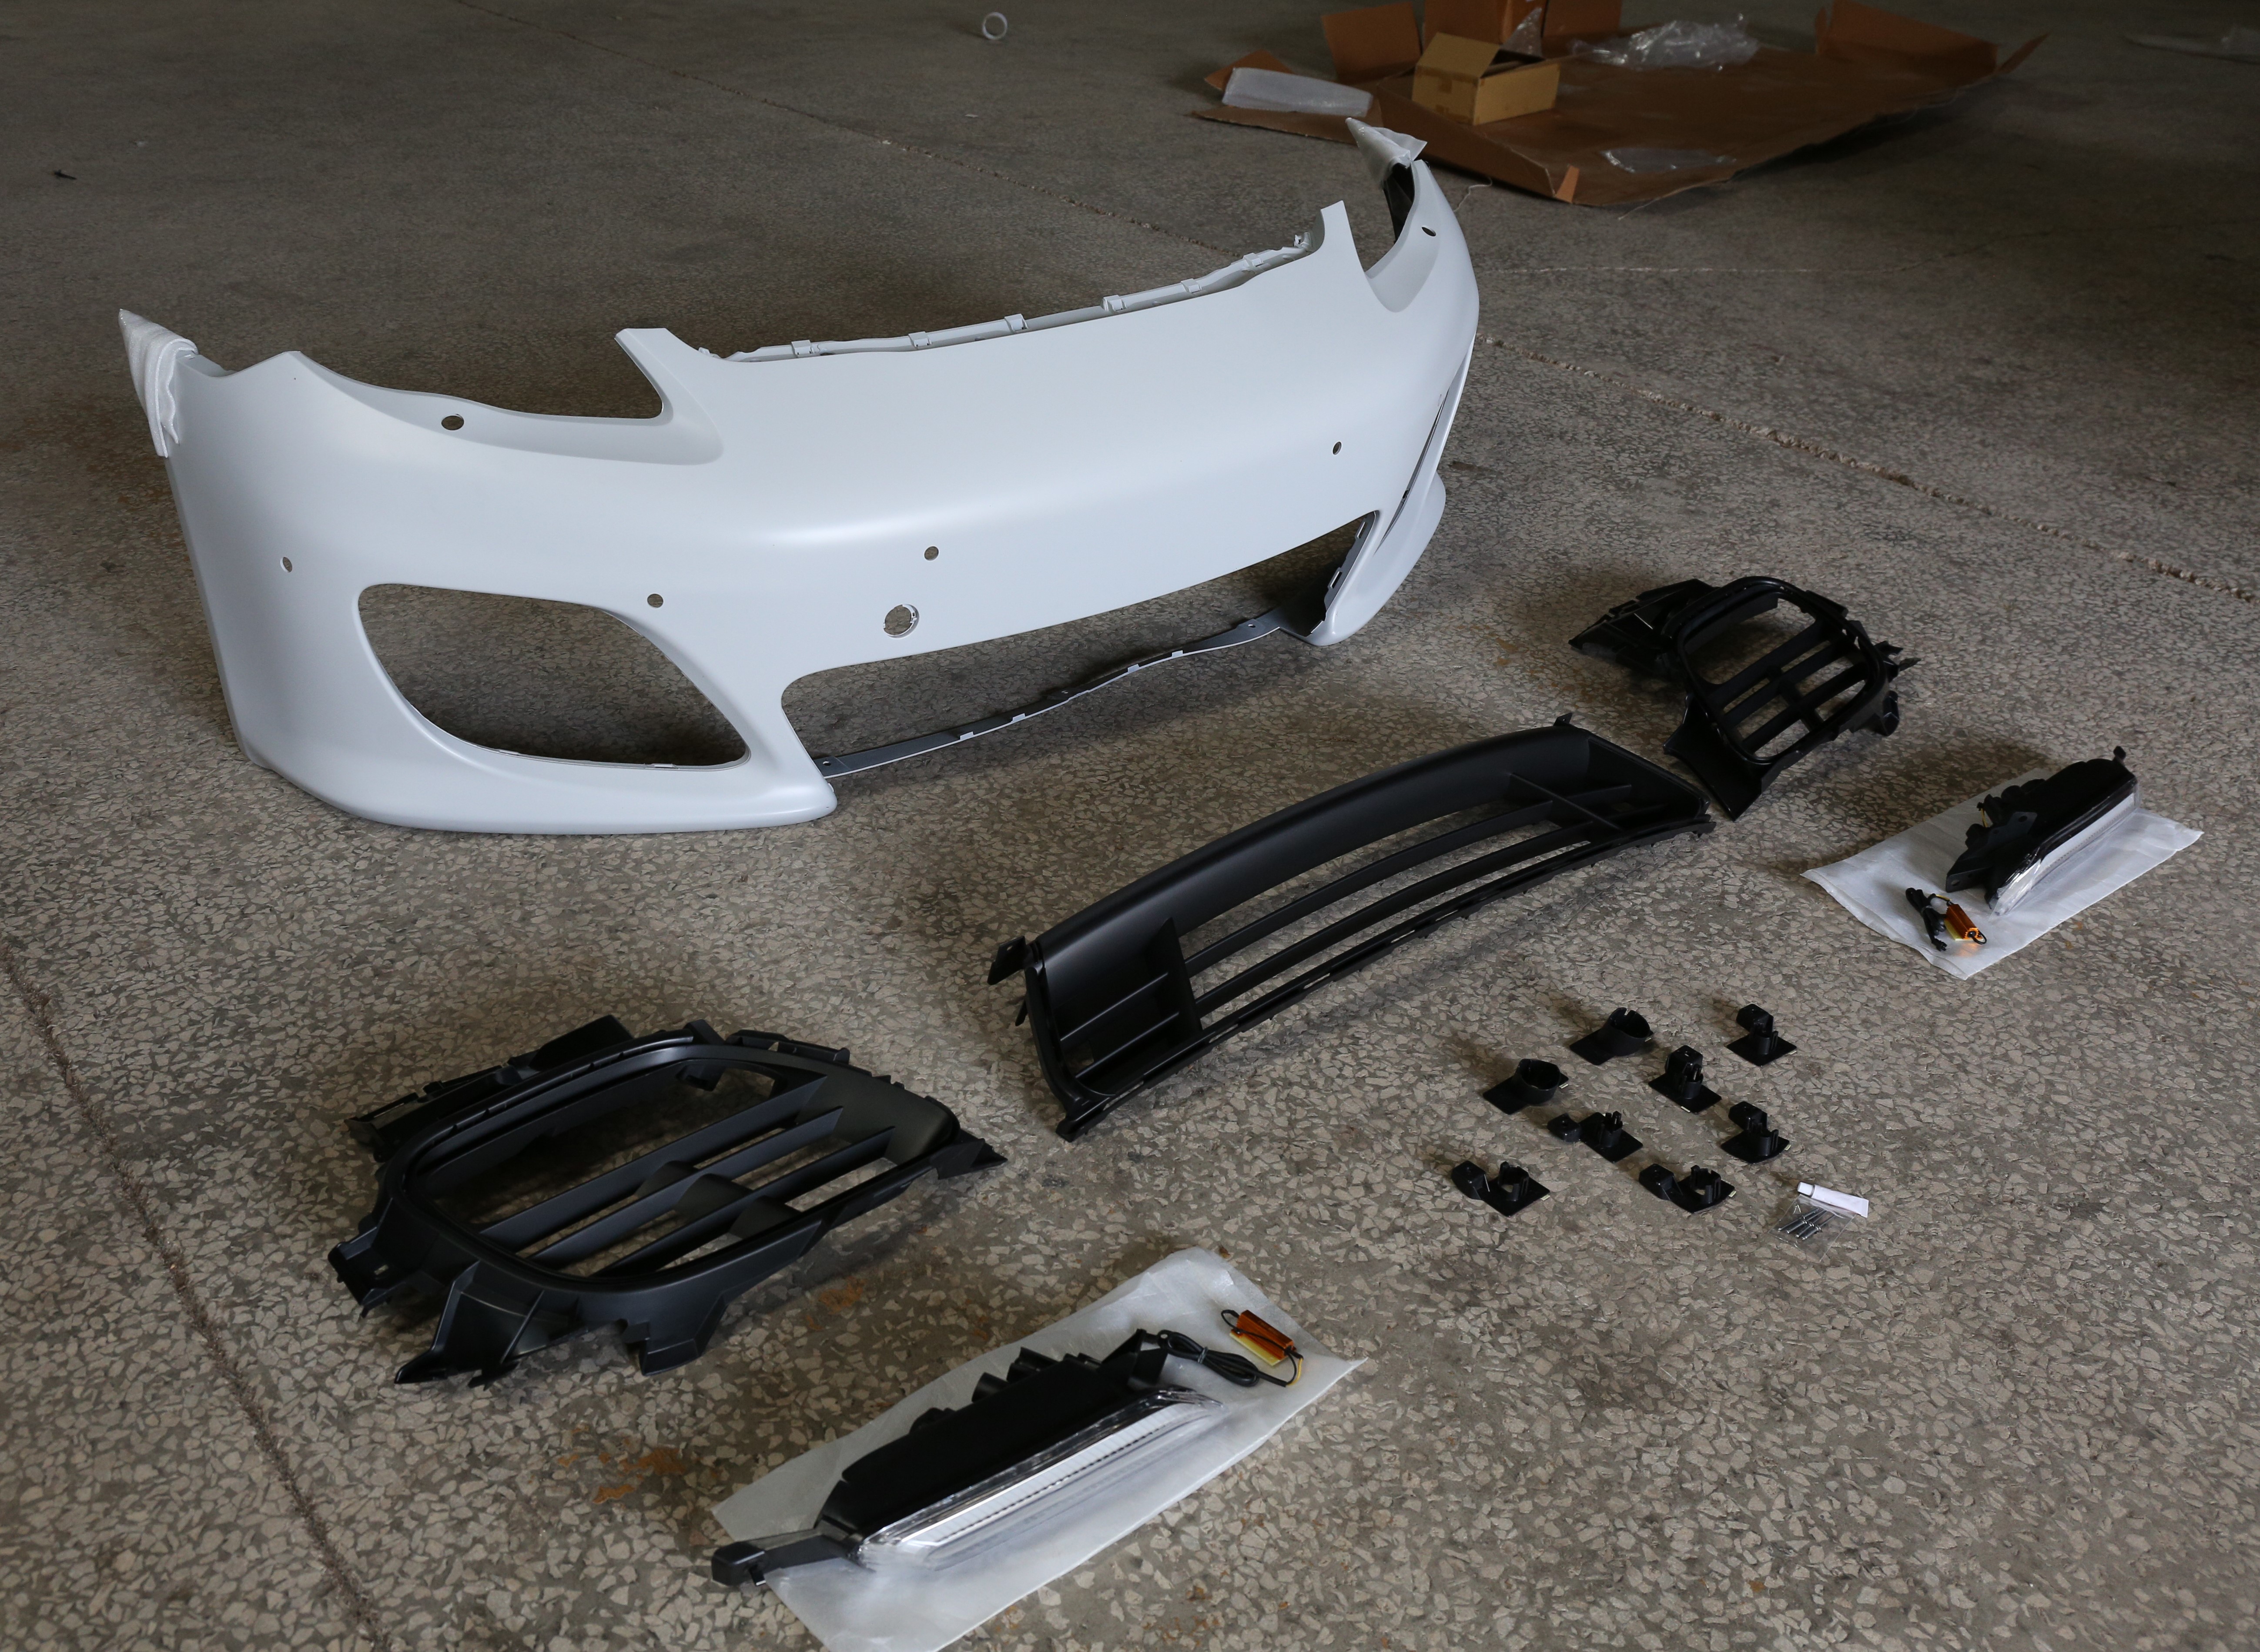 for 2010-2013 years panamera 970 upgrade pp material Turbo GTS front bumper body kit facelift Black Primming